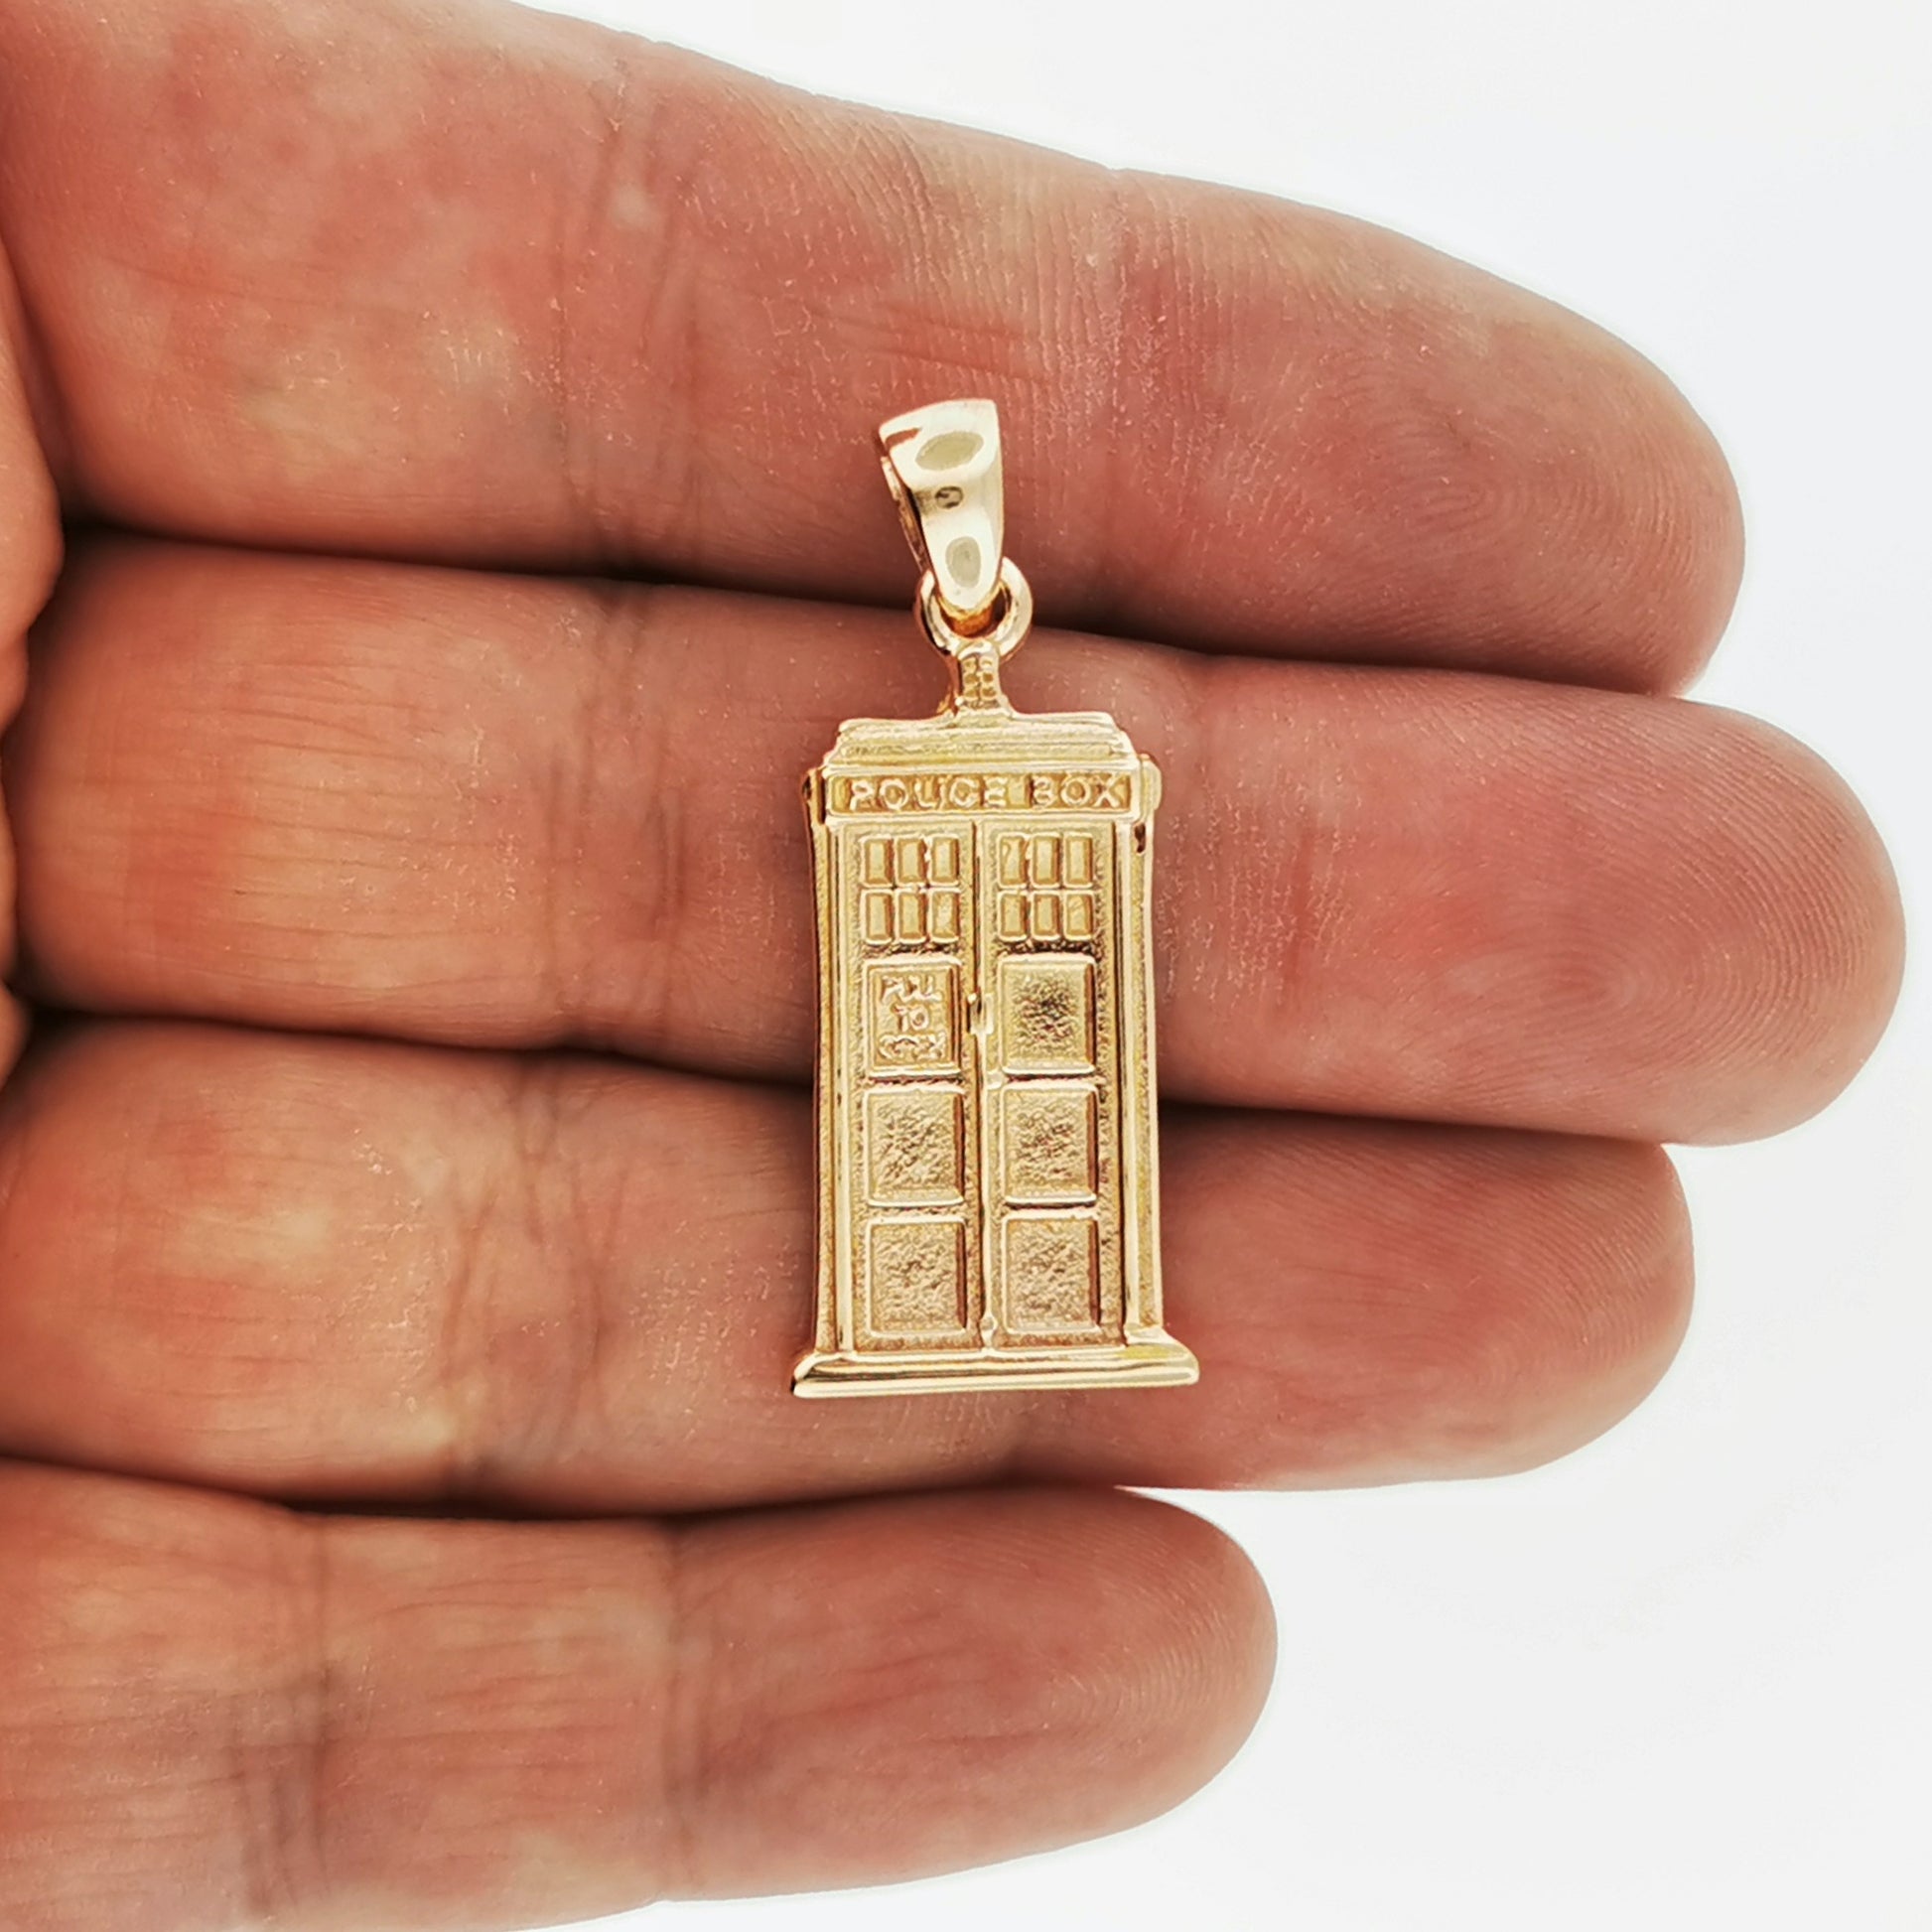 Handmade Tardis Charm Pendant from Dr Who, Dr Who Pendant, Sci-Fi Pendant, Phone Box Pendant, Police Box Pendant, Phone Box Charm, Sci fi Charm Pendant, Dr Who Tardis Pendant, Bronze Tardis Charm Pendant, Sci-fi Jewelry, Bronze Tardis Pendant